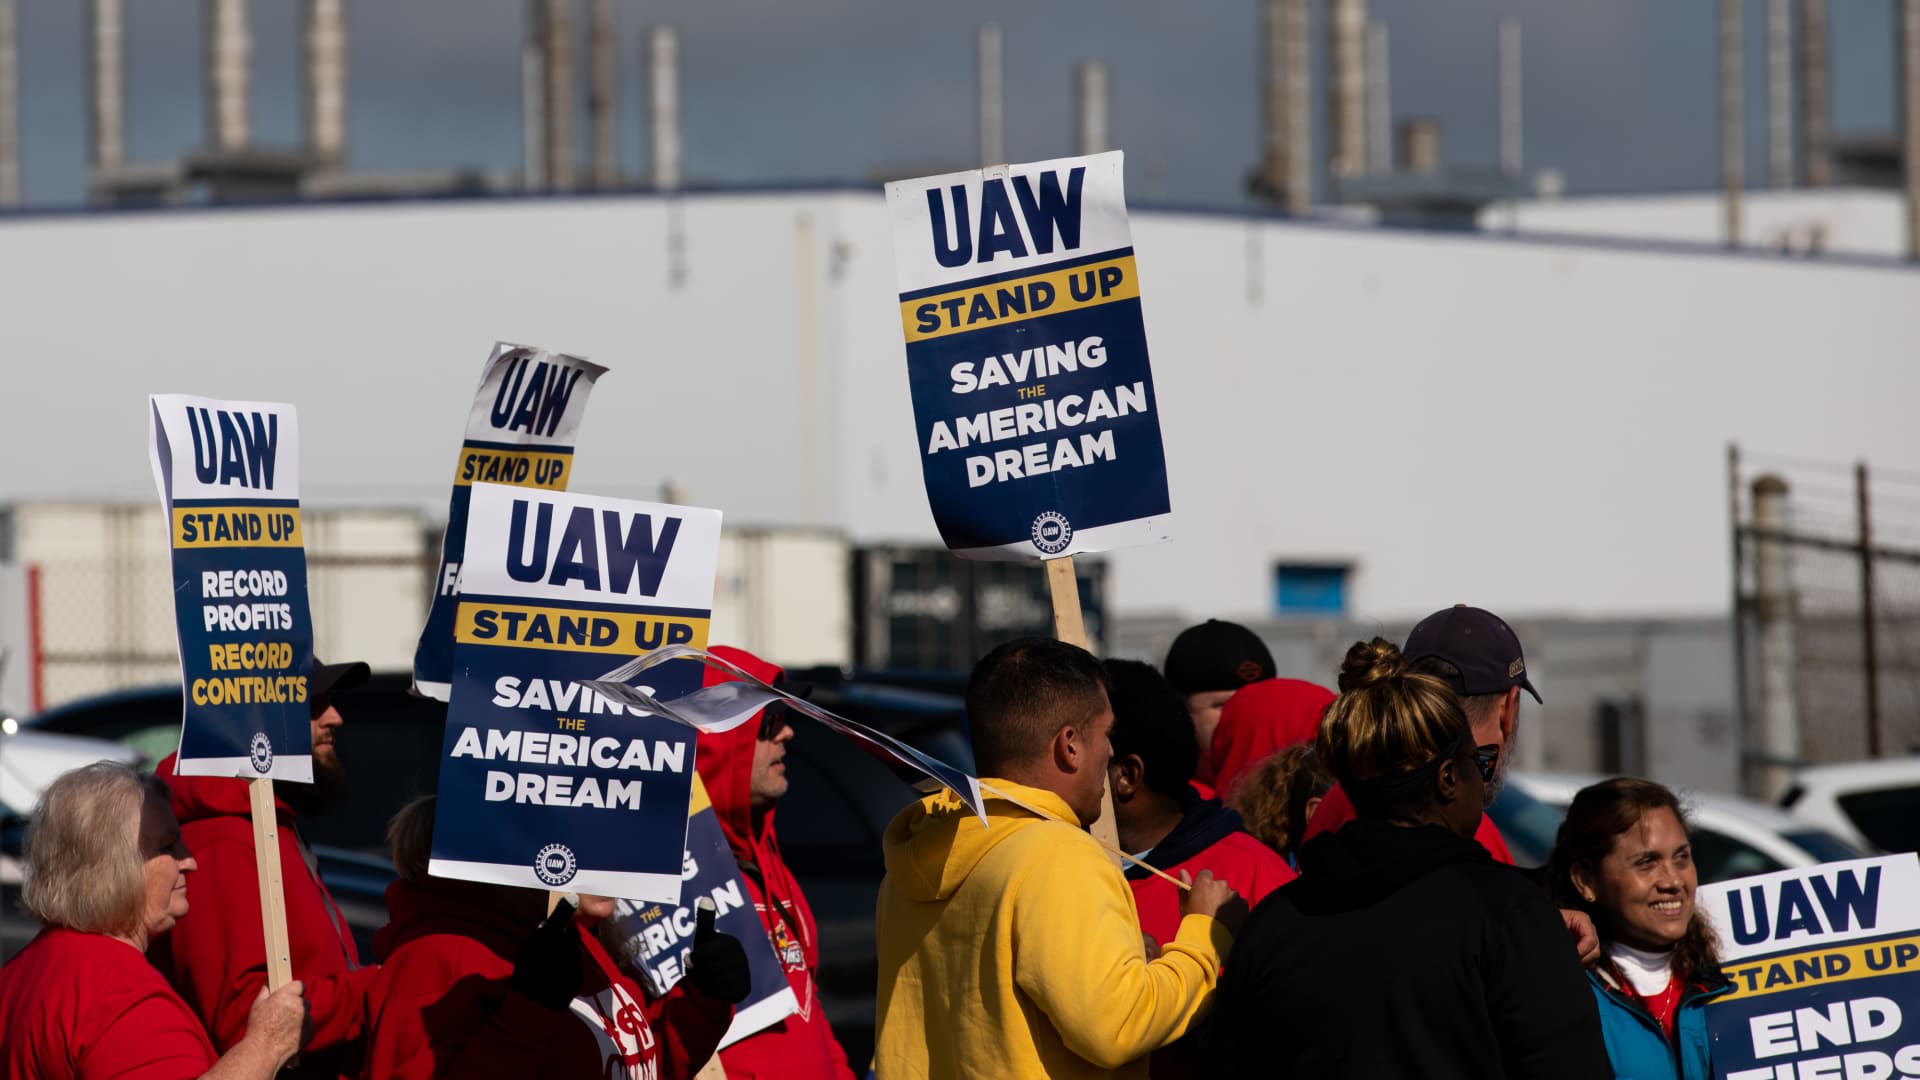 GM and Stellantis just laid off over 2,000 additional workers because of the UAW’s strike